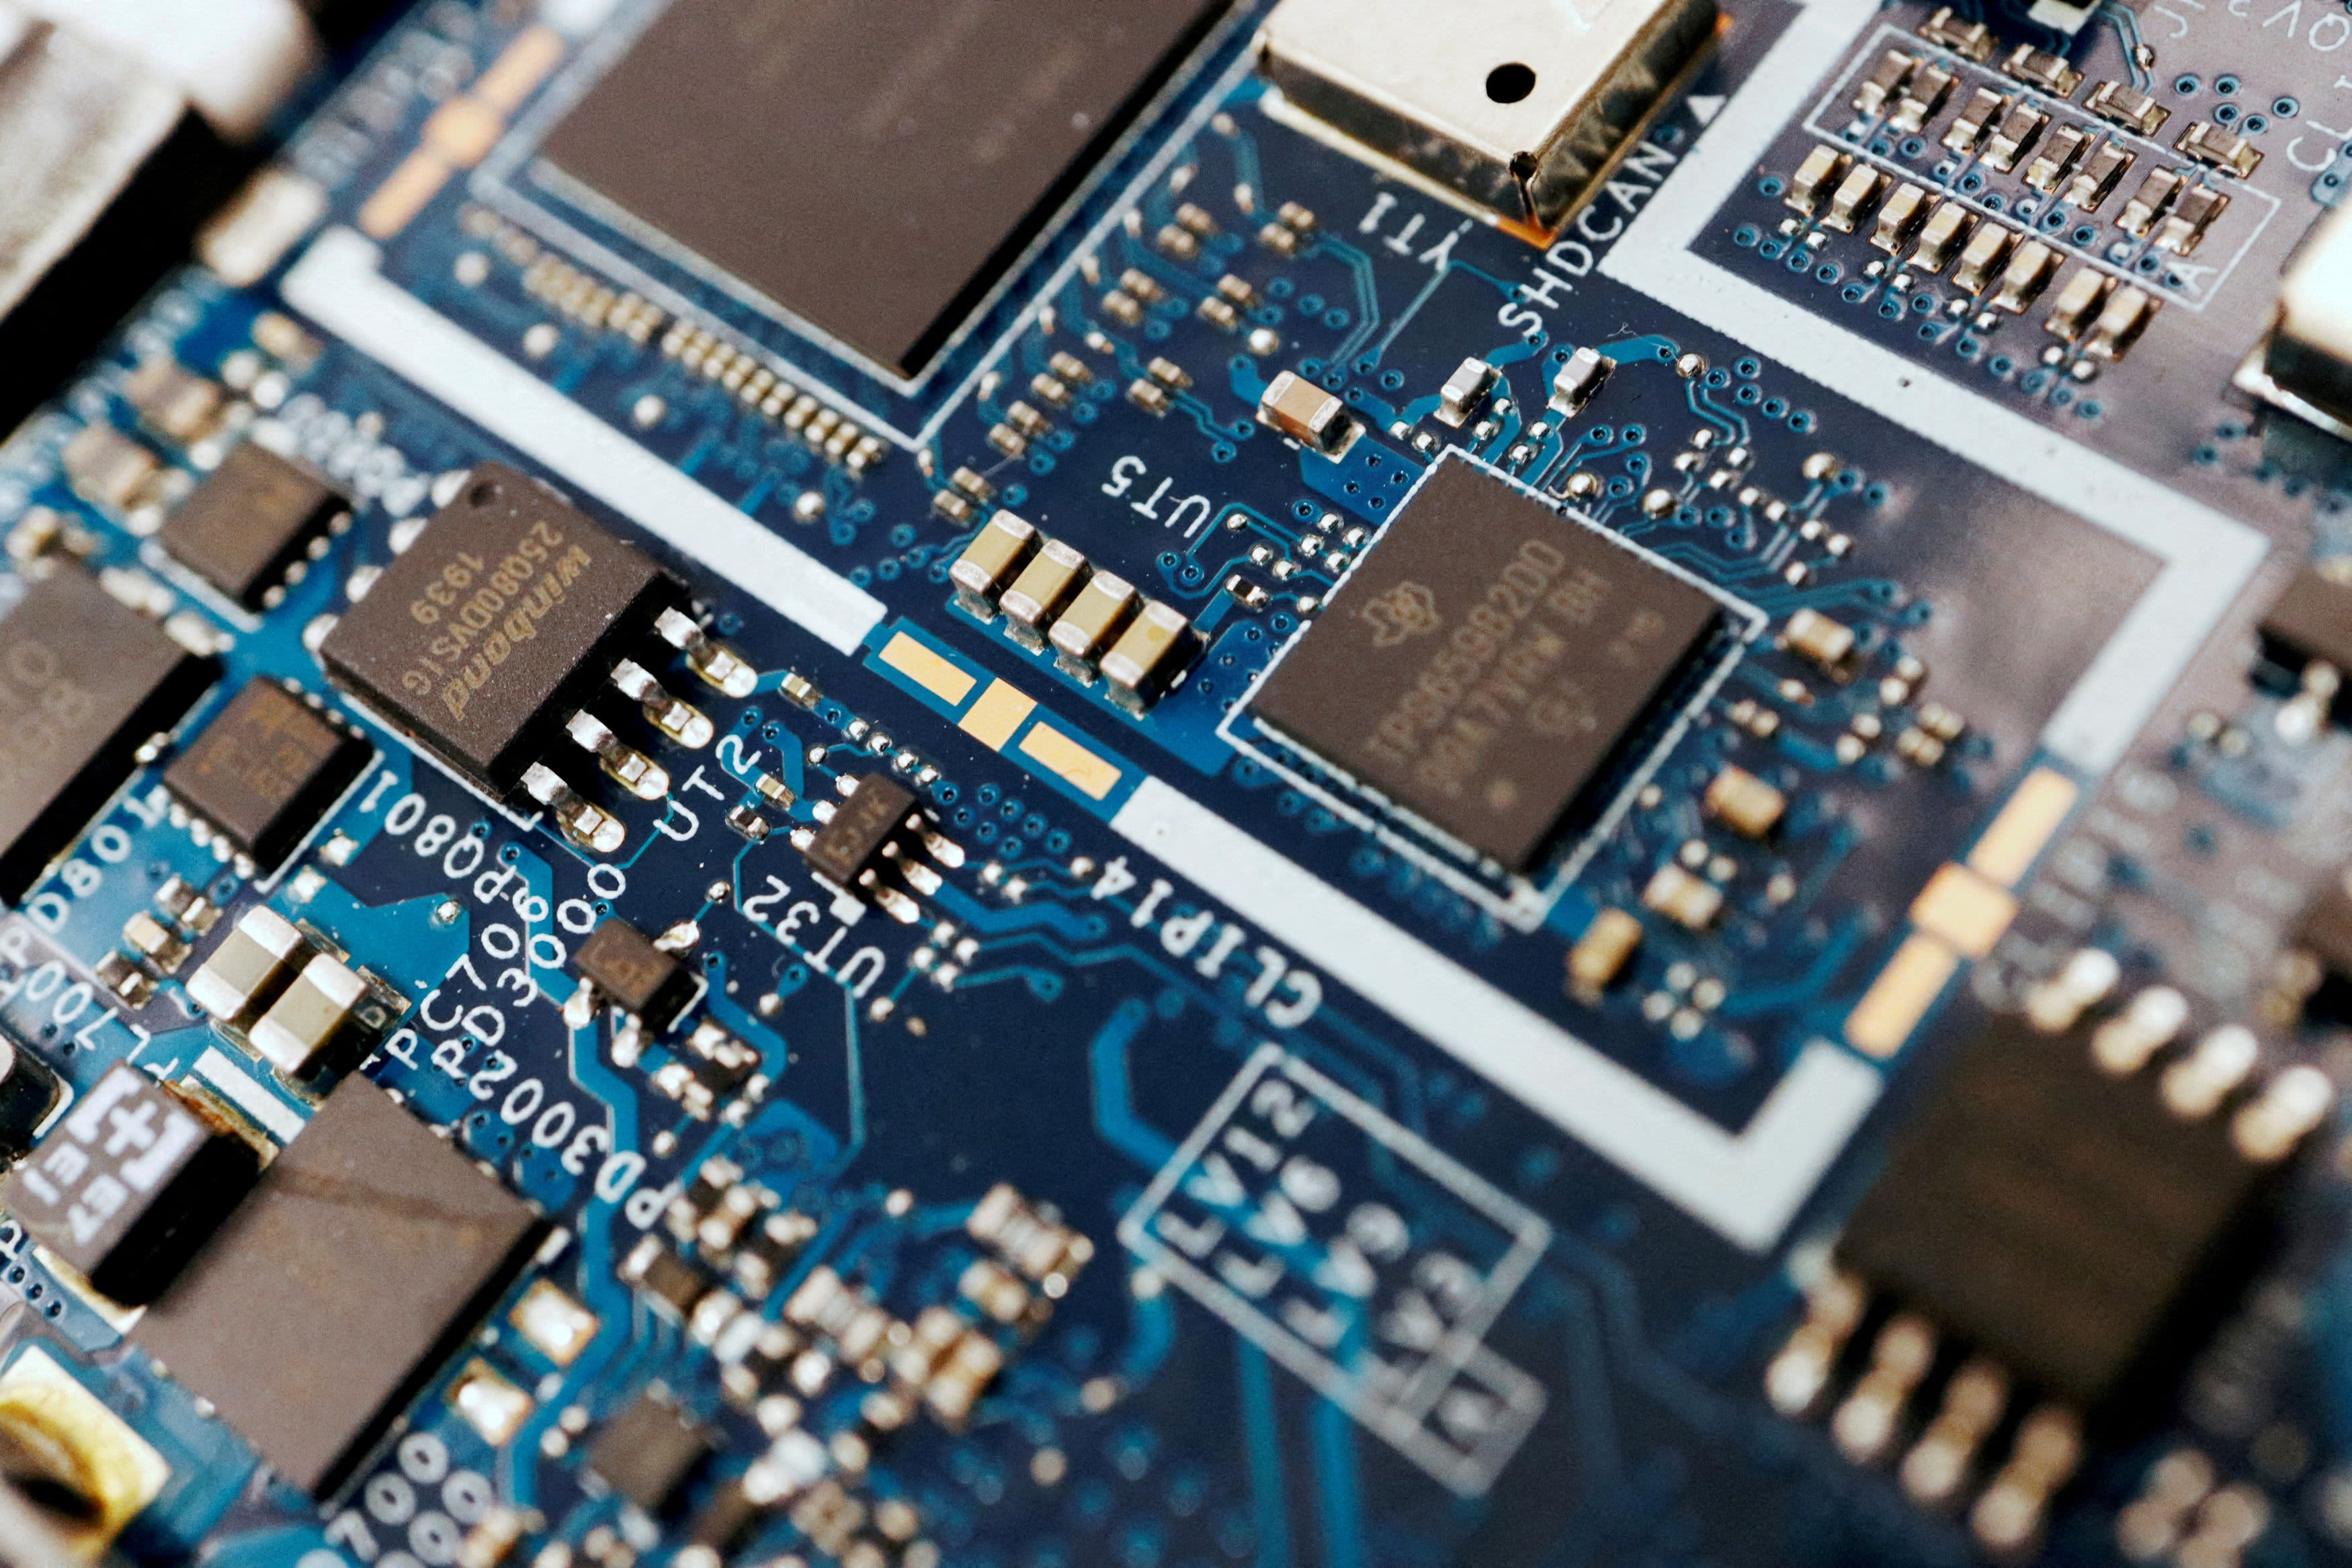 Shares of this little-known global chip firm are set to rise by 50%, Barclays says